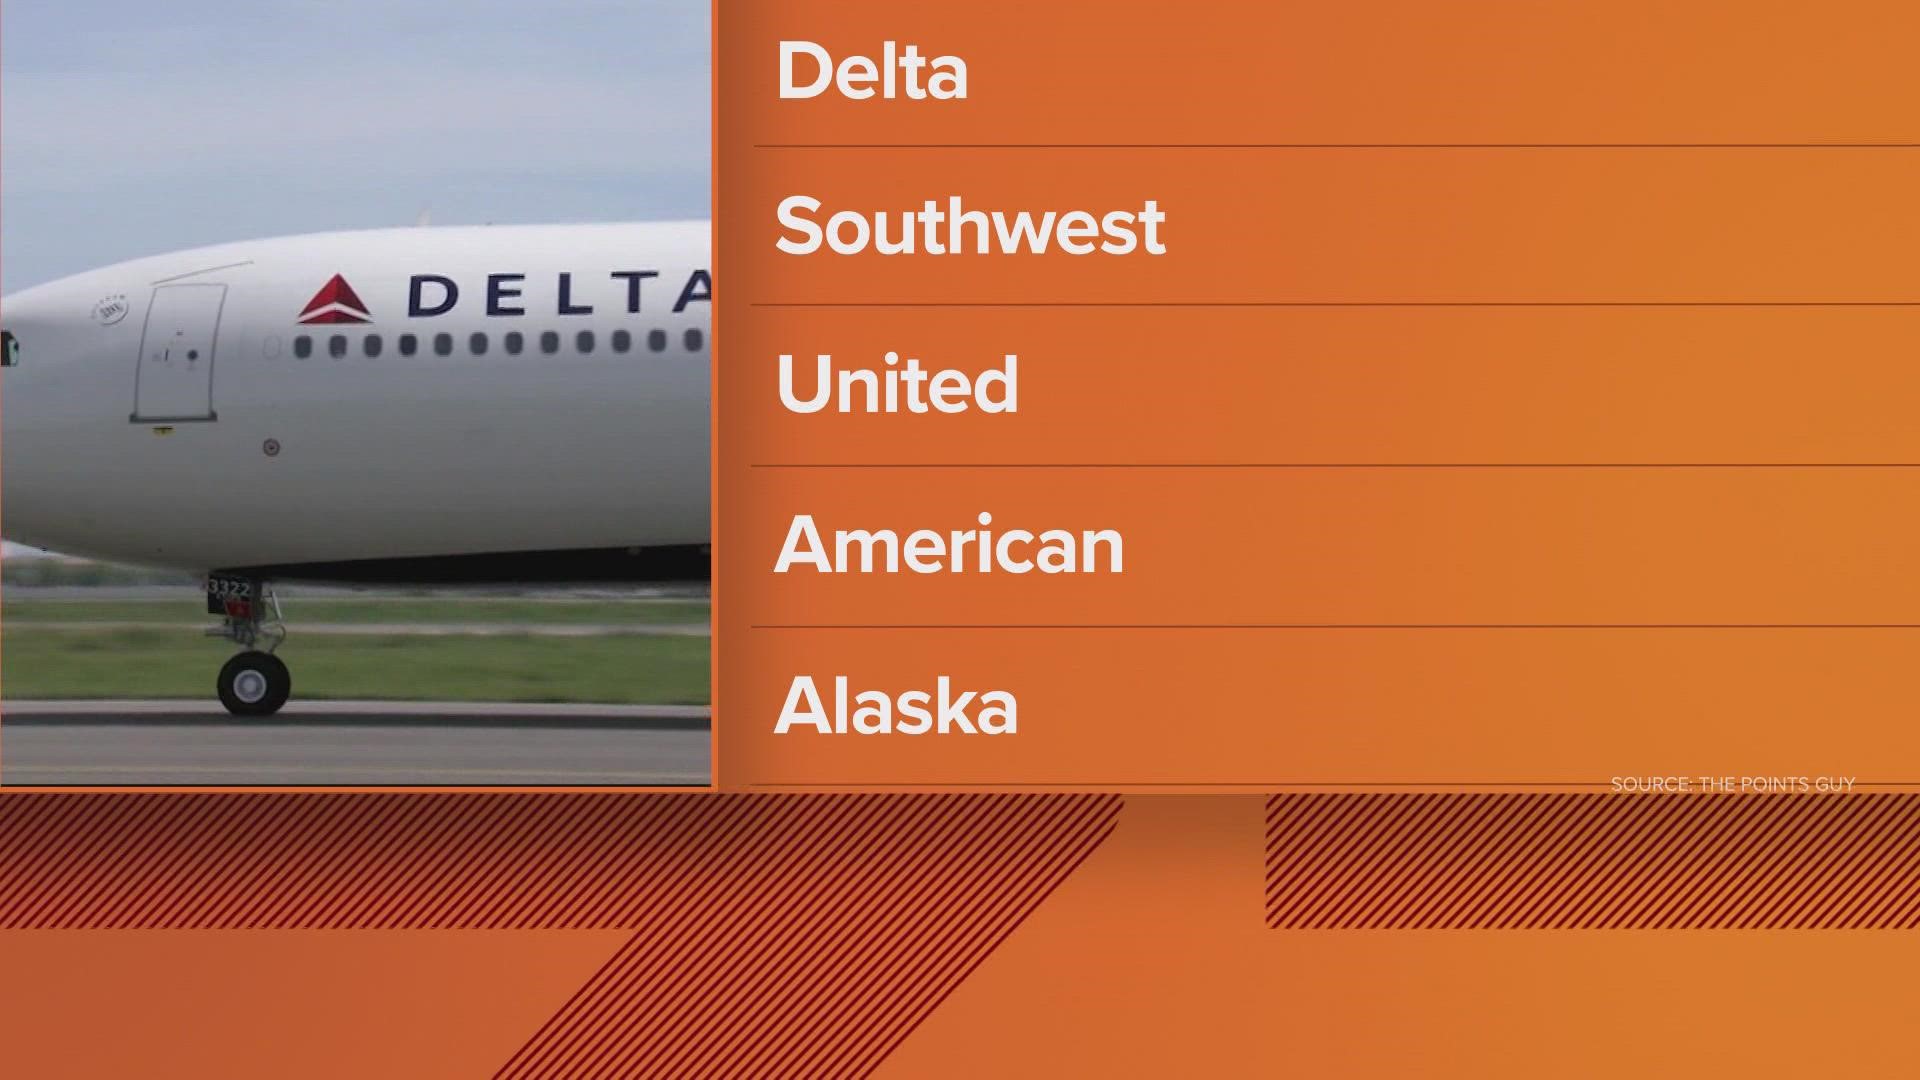 Delta was followed by Southwest at No. 2.